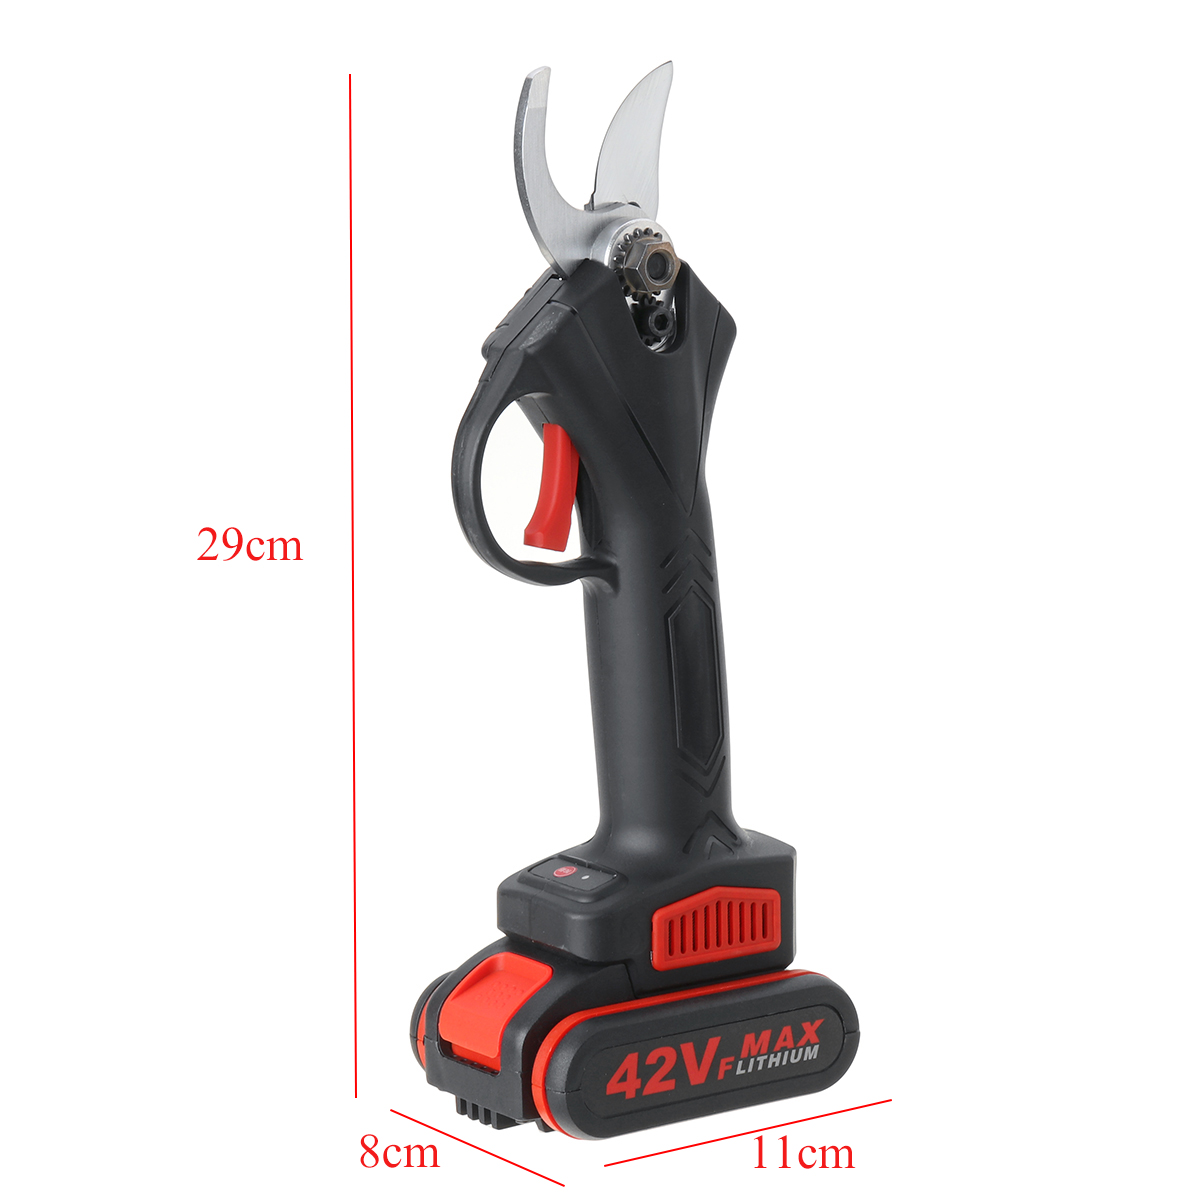 42VF-Rechargeable-Electric-Pruning-Shears-Scissors-Branch-Cutter-Garden-Tool-W-1-or-2-Li-ion-Battery-1709169-7